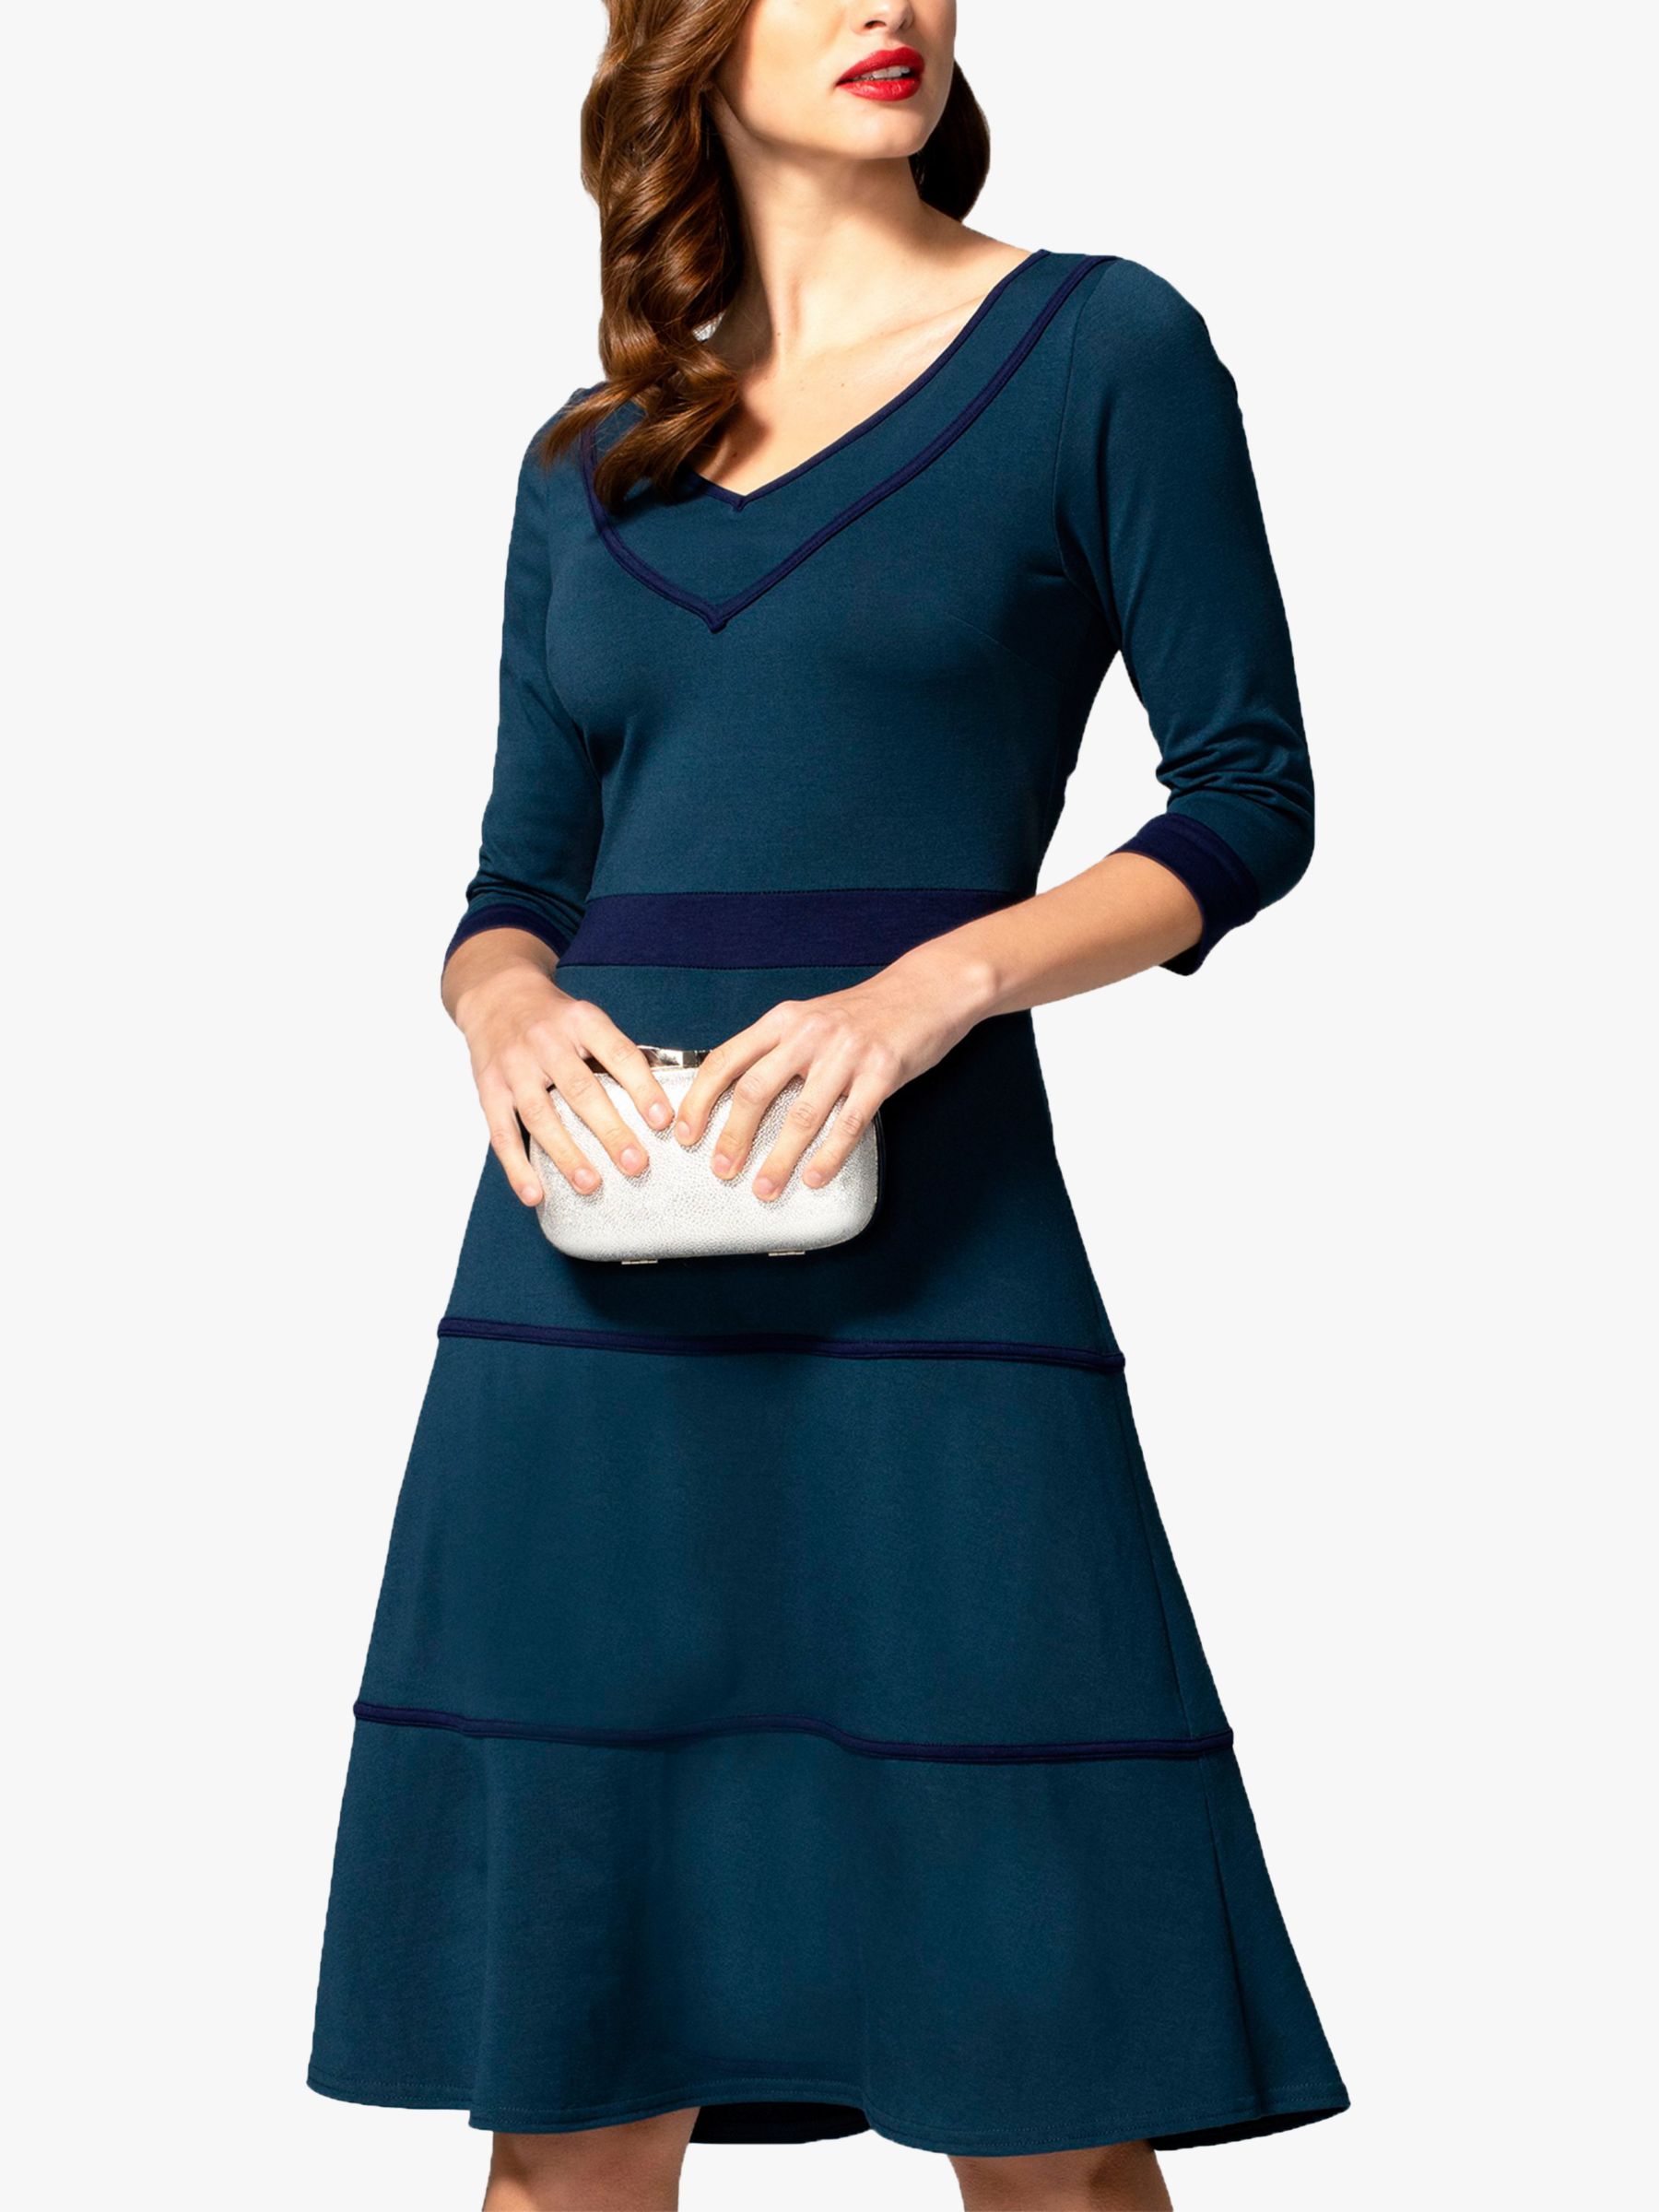 Buy HotSquash Contrast Ribbing Tiered Dress Online at johnlewis.com